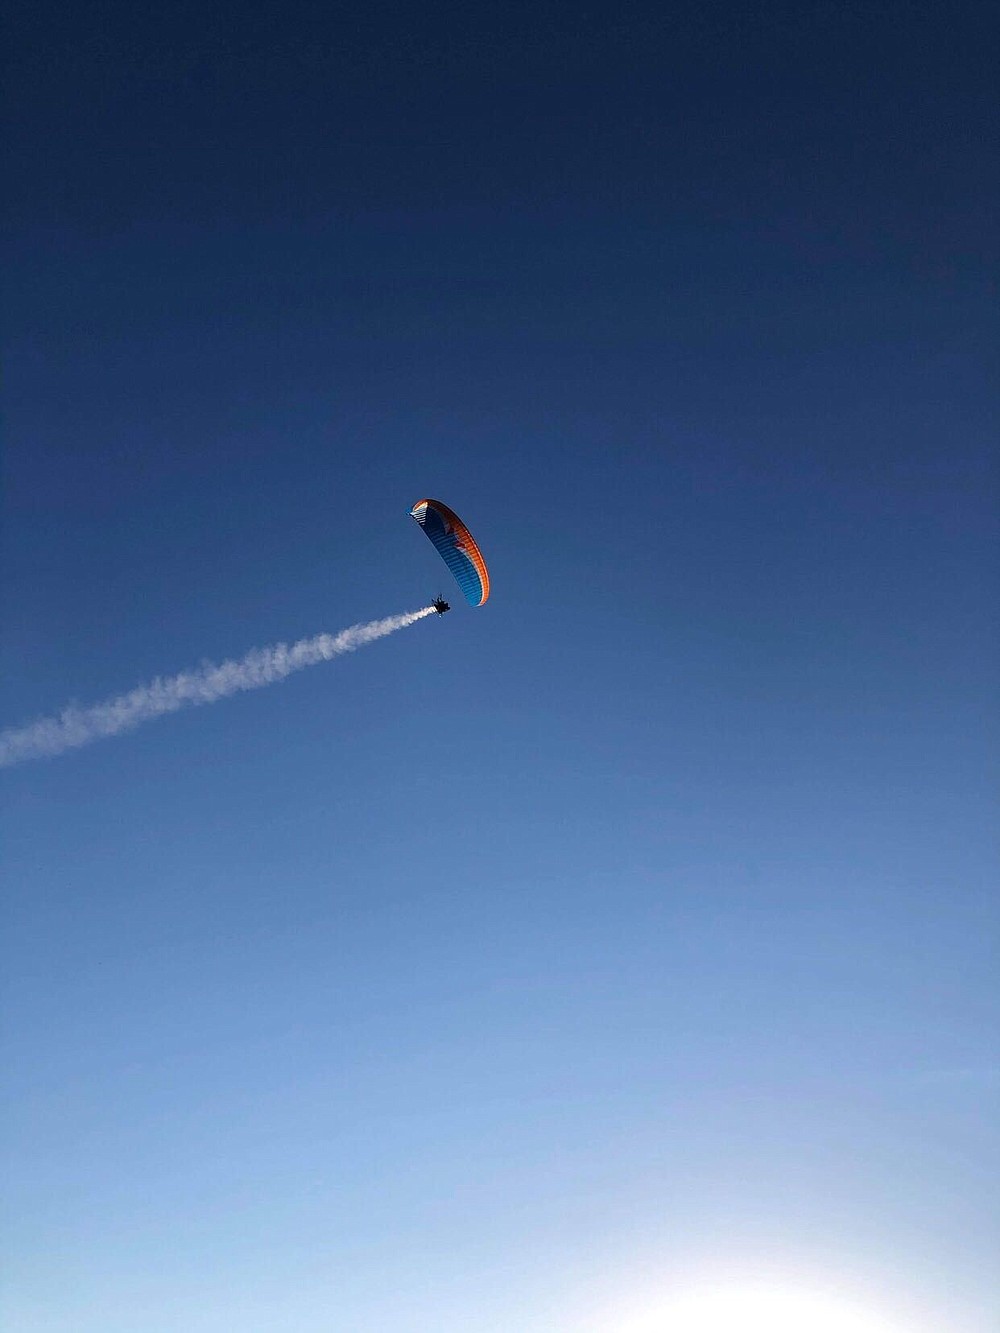 A trail of white smoke can be seen coming from Don Guthrie’s smoke machine attachment on his powered paraglider. (Courtesy of Don Guthrie)